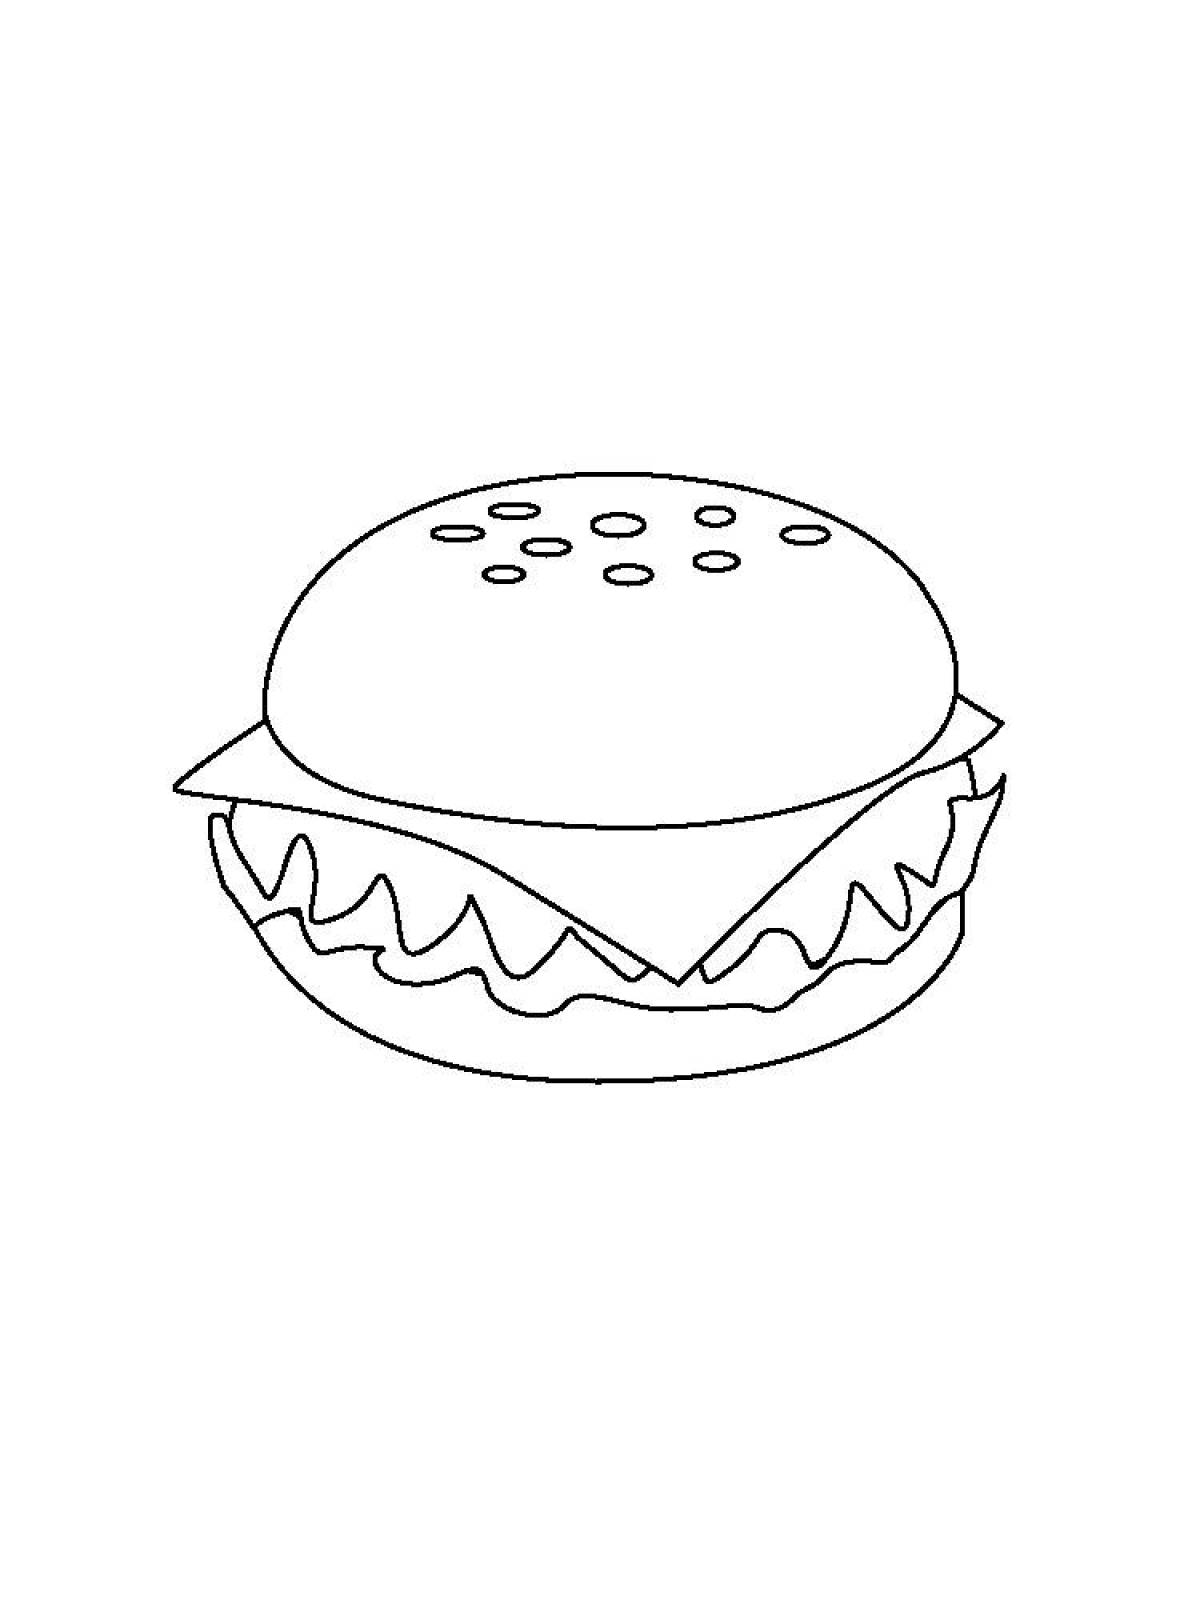 Colouring awesome burger